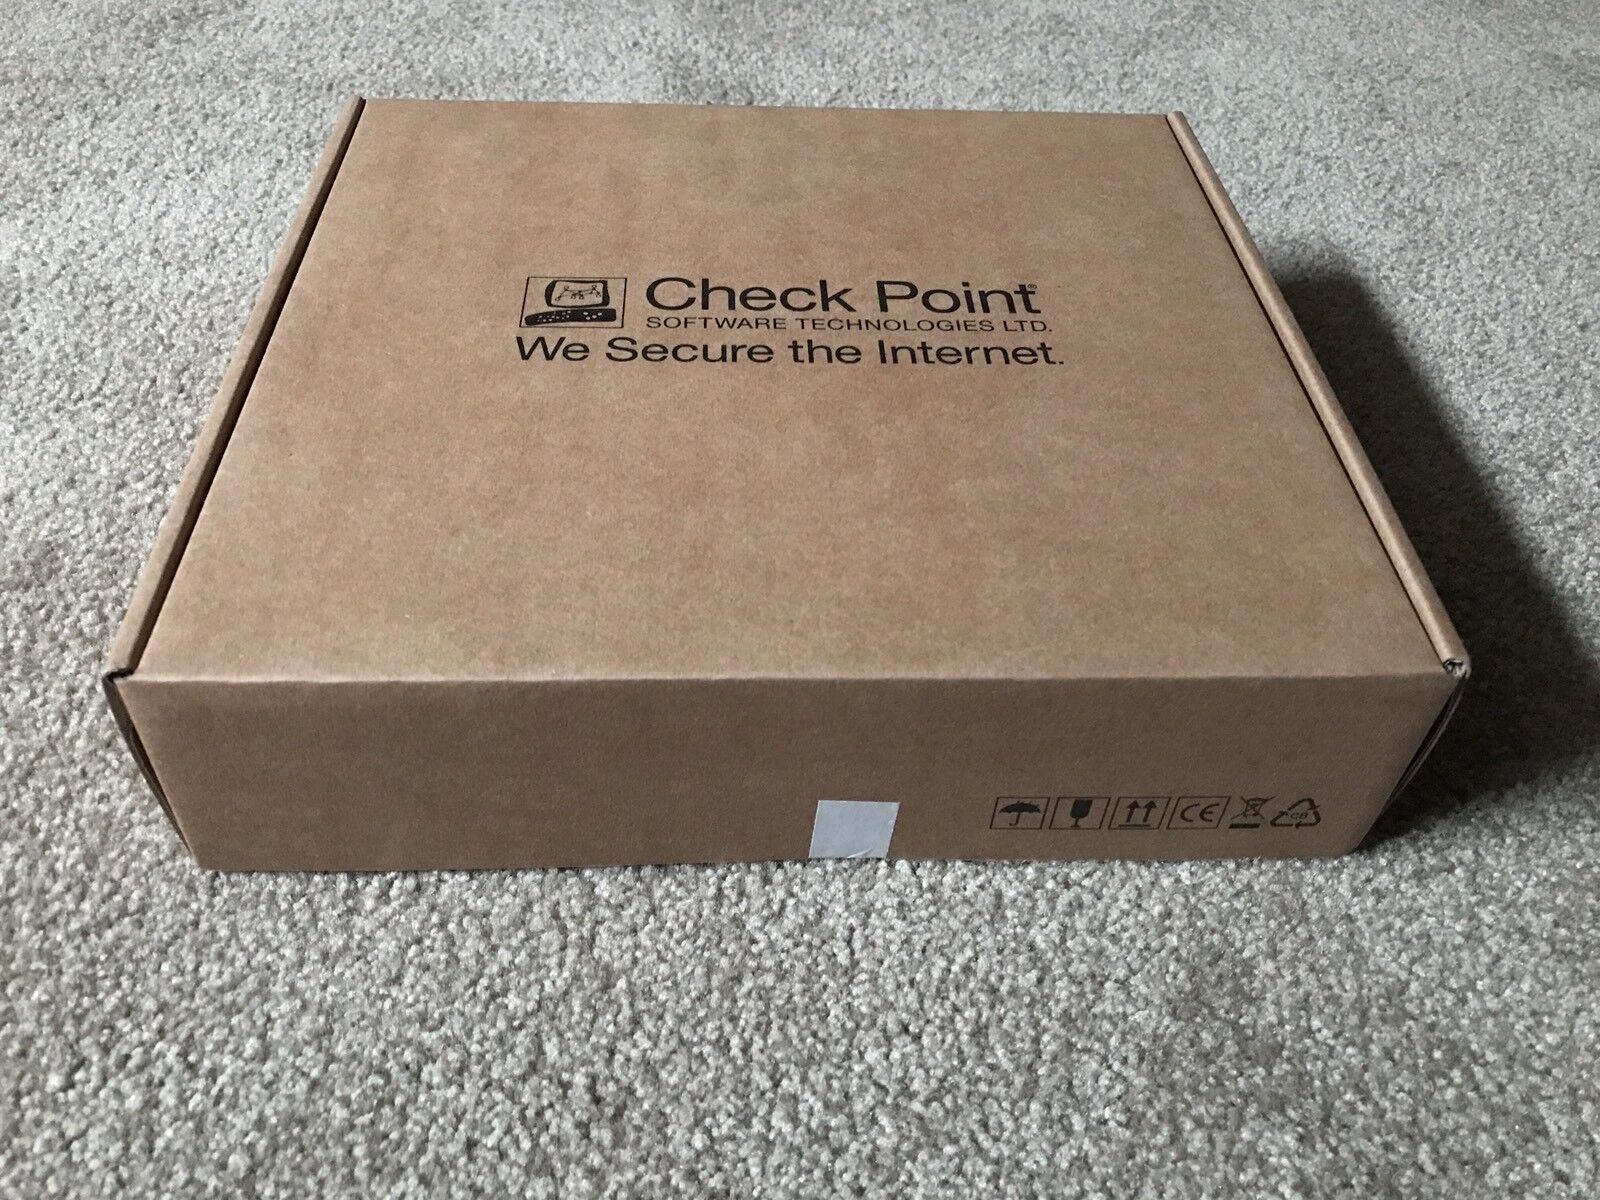 Check Point 1120 Security Appliance